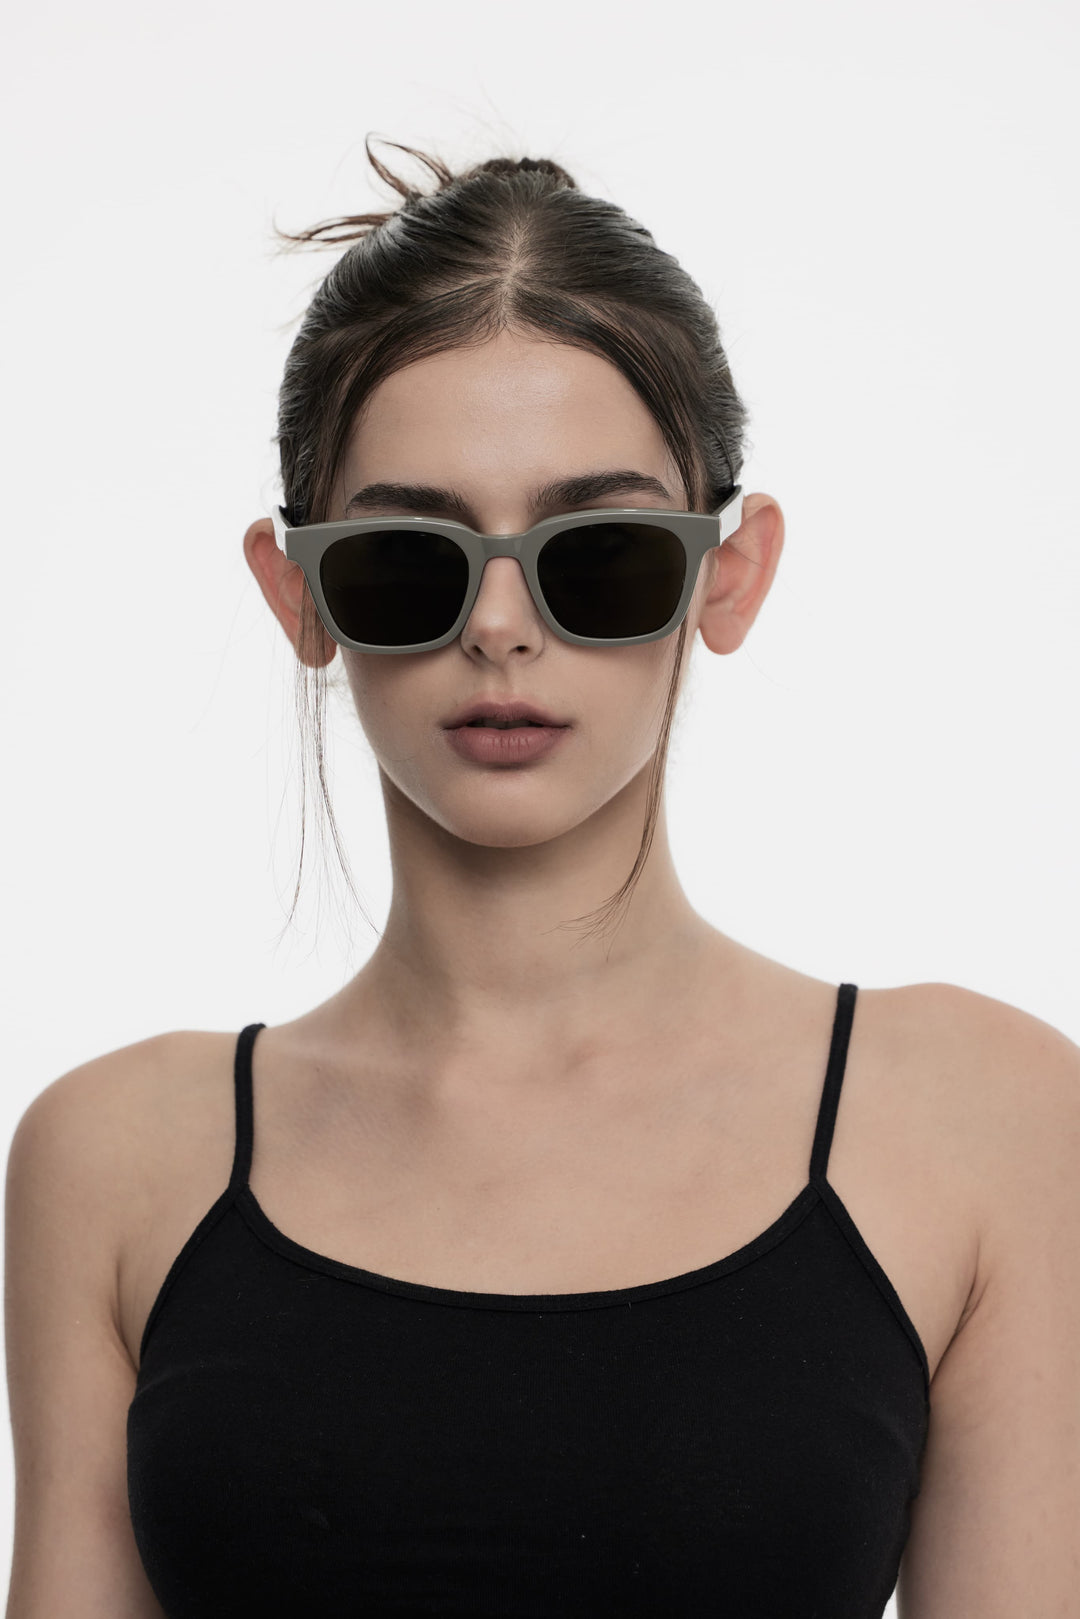 Female Model of her front face wearing Bubblegum in grey High-quality square sunglasses from Mercury Retrograde Daydream Collection 